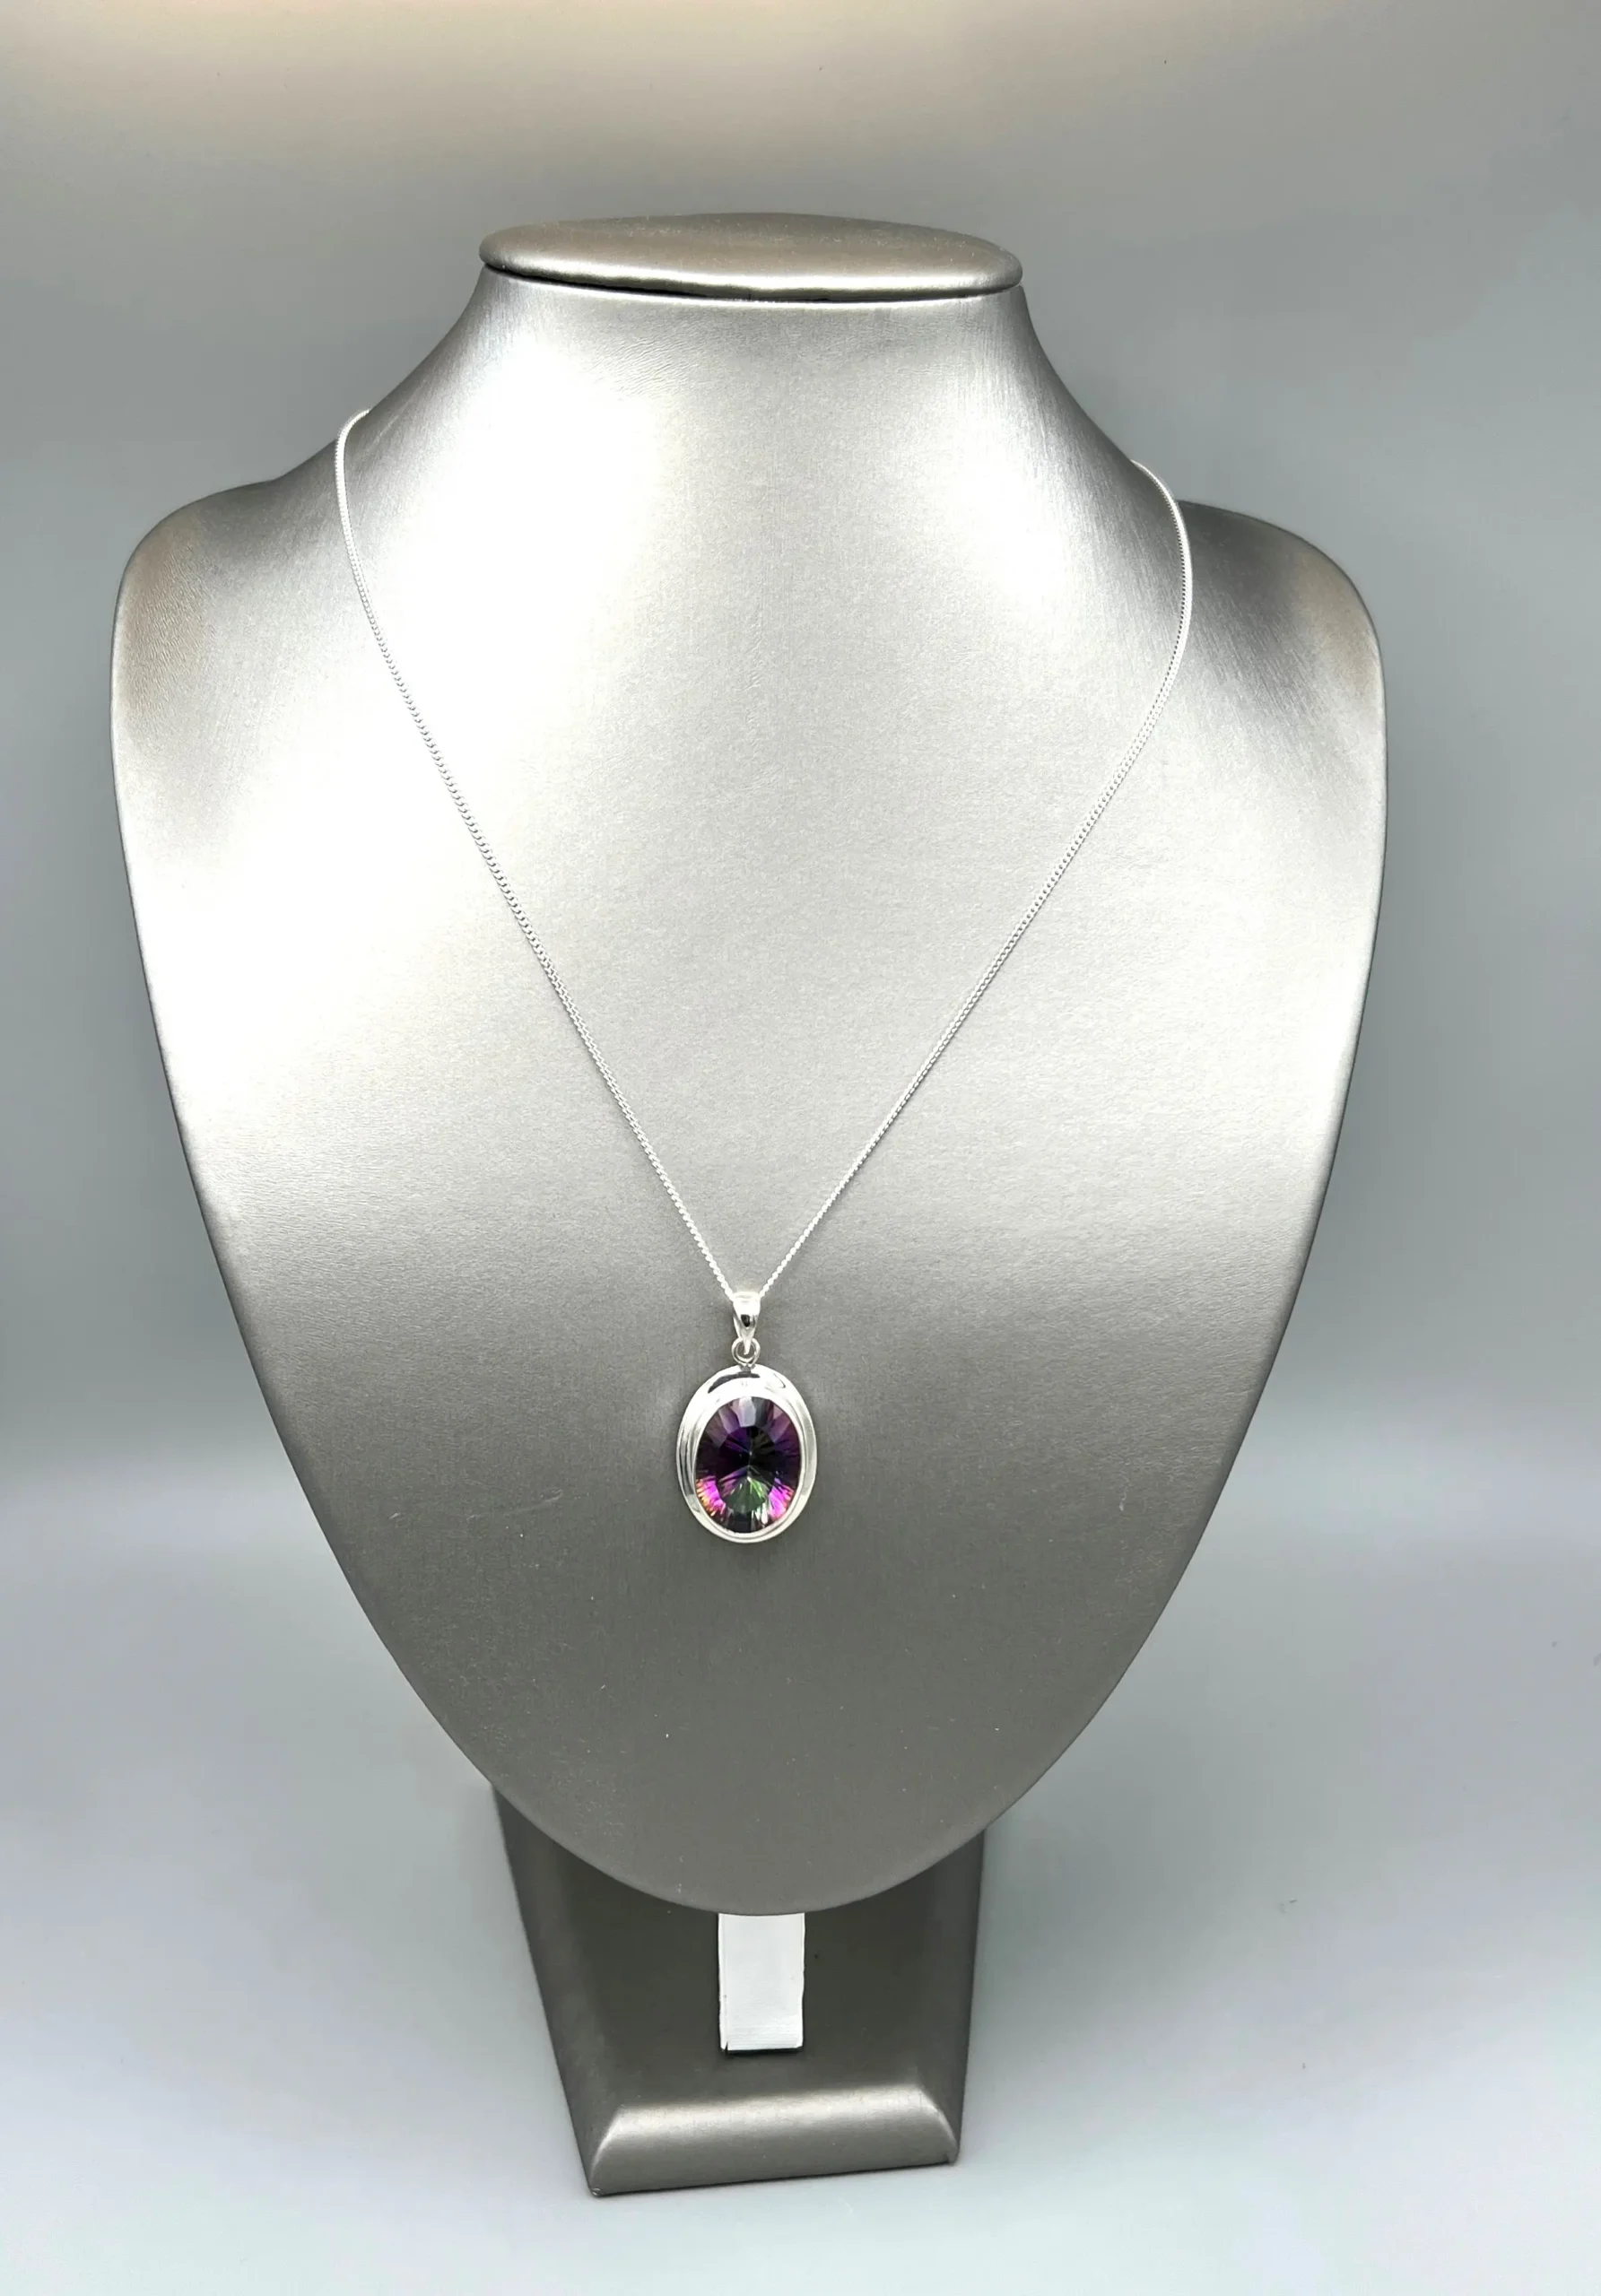 Silver Mystic Topaz Pendant Necklace With Gemstone